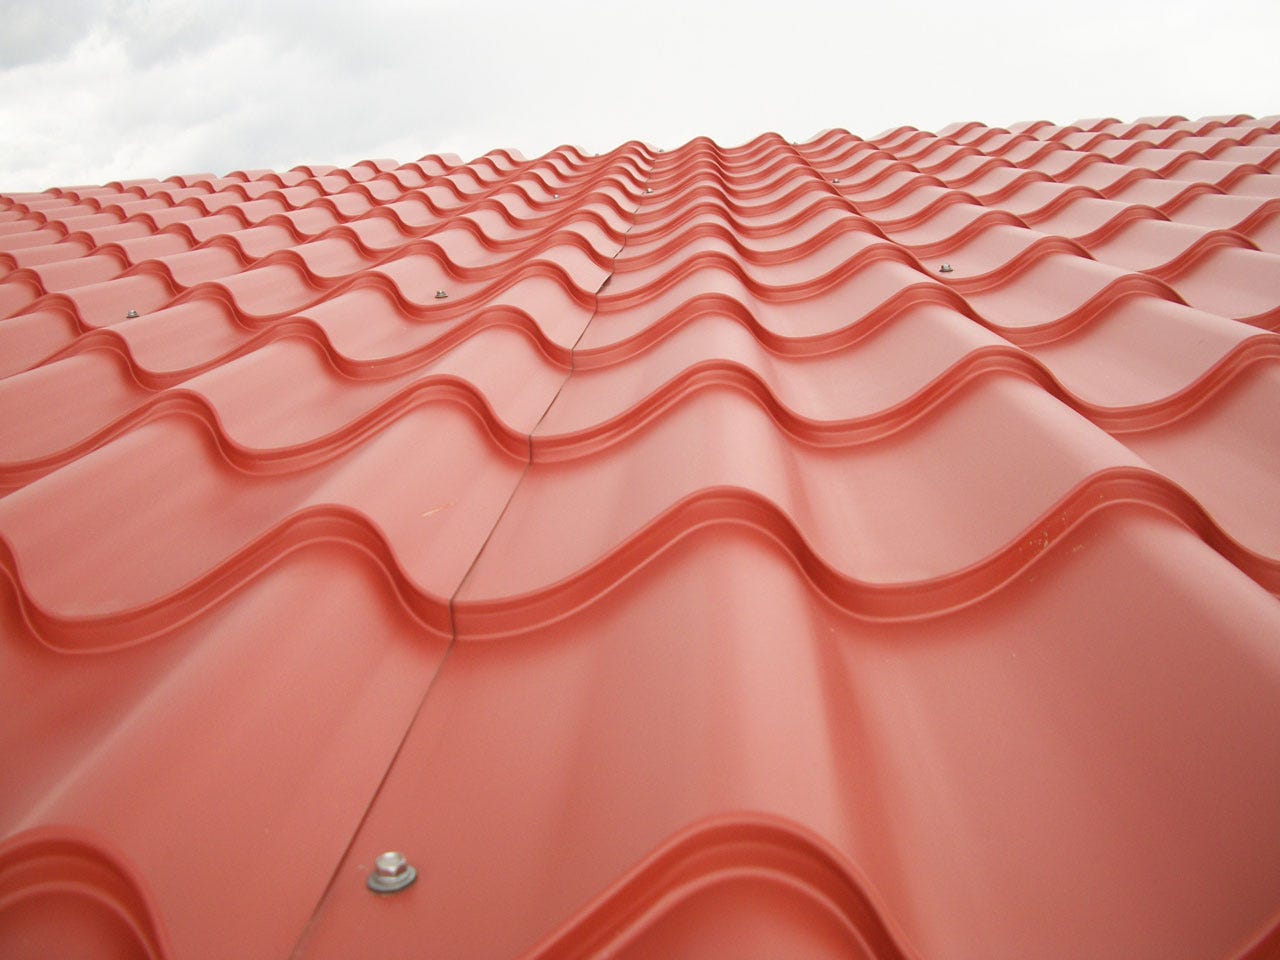 Why Roofing Materials Get Stolen and How You Can Prevent It